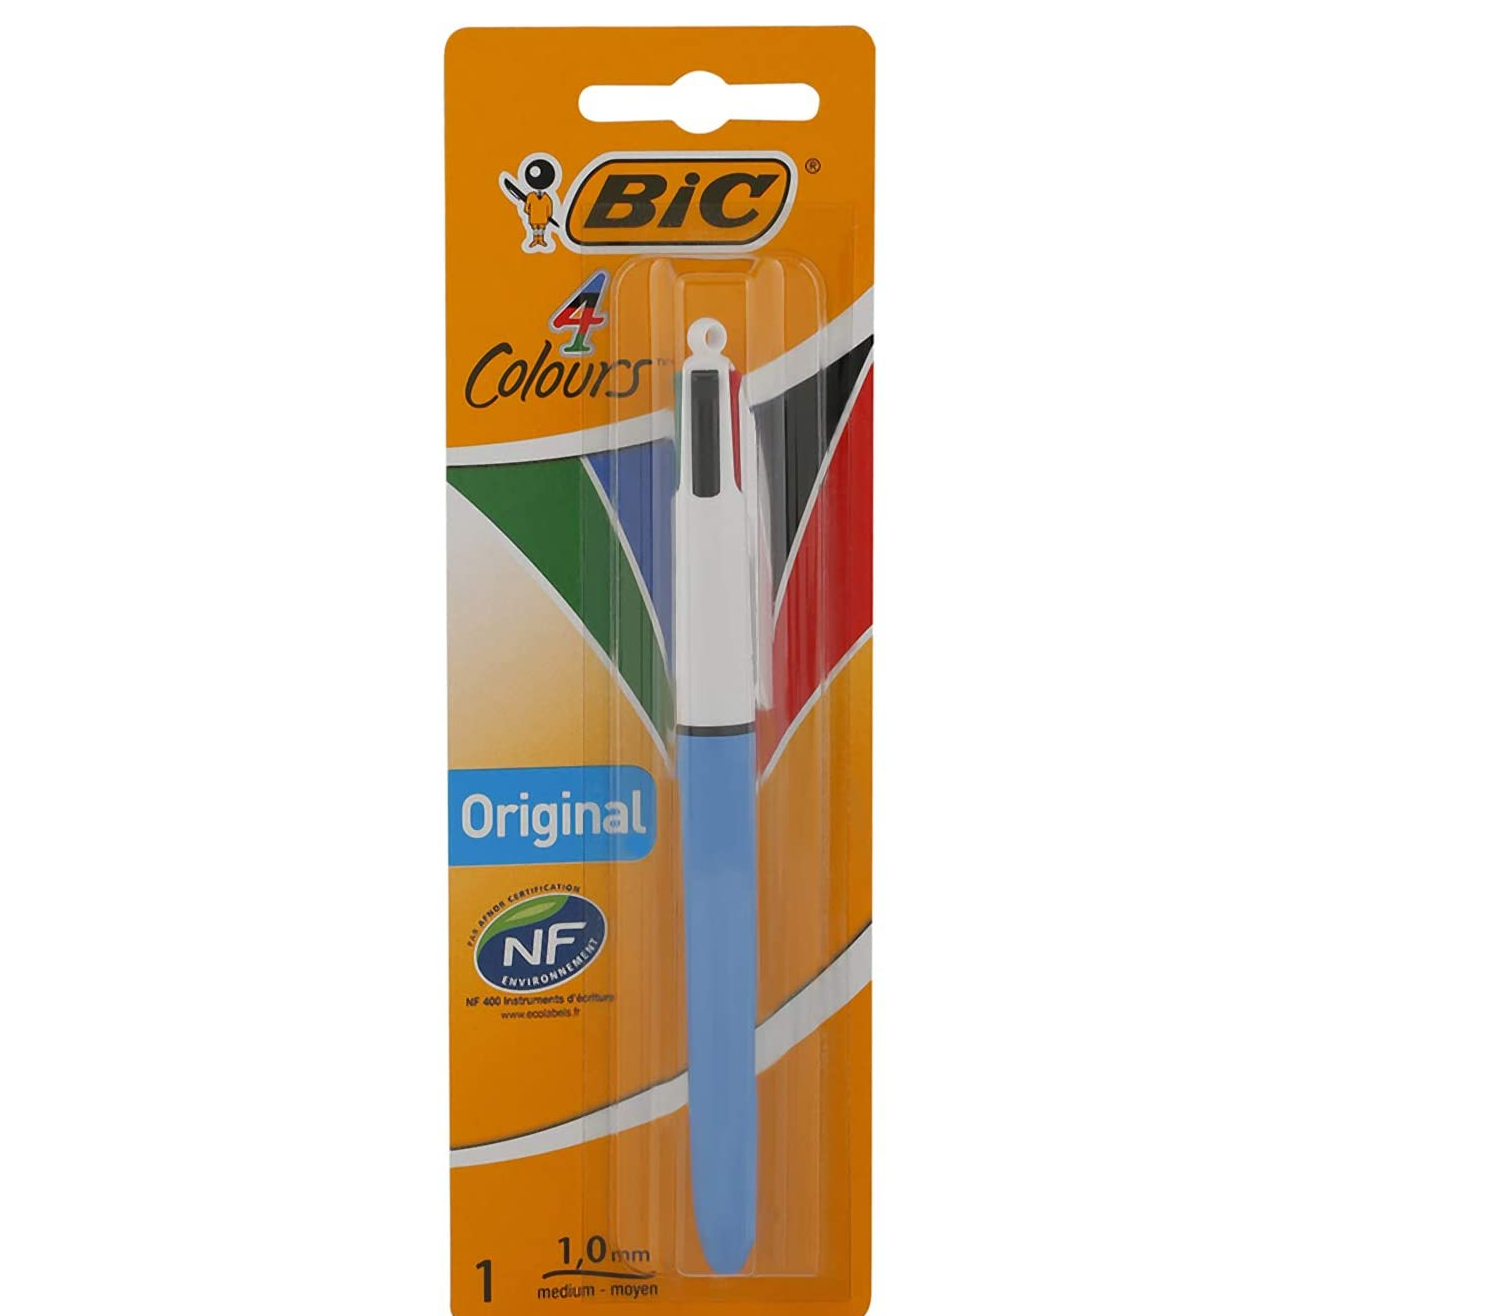 Bic Intensity Fine Point 0.4mm Assorted Colours Classic 4